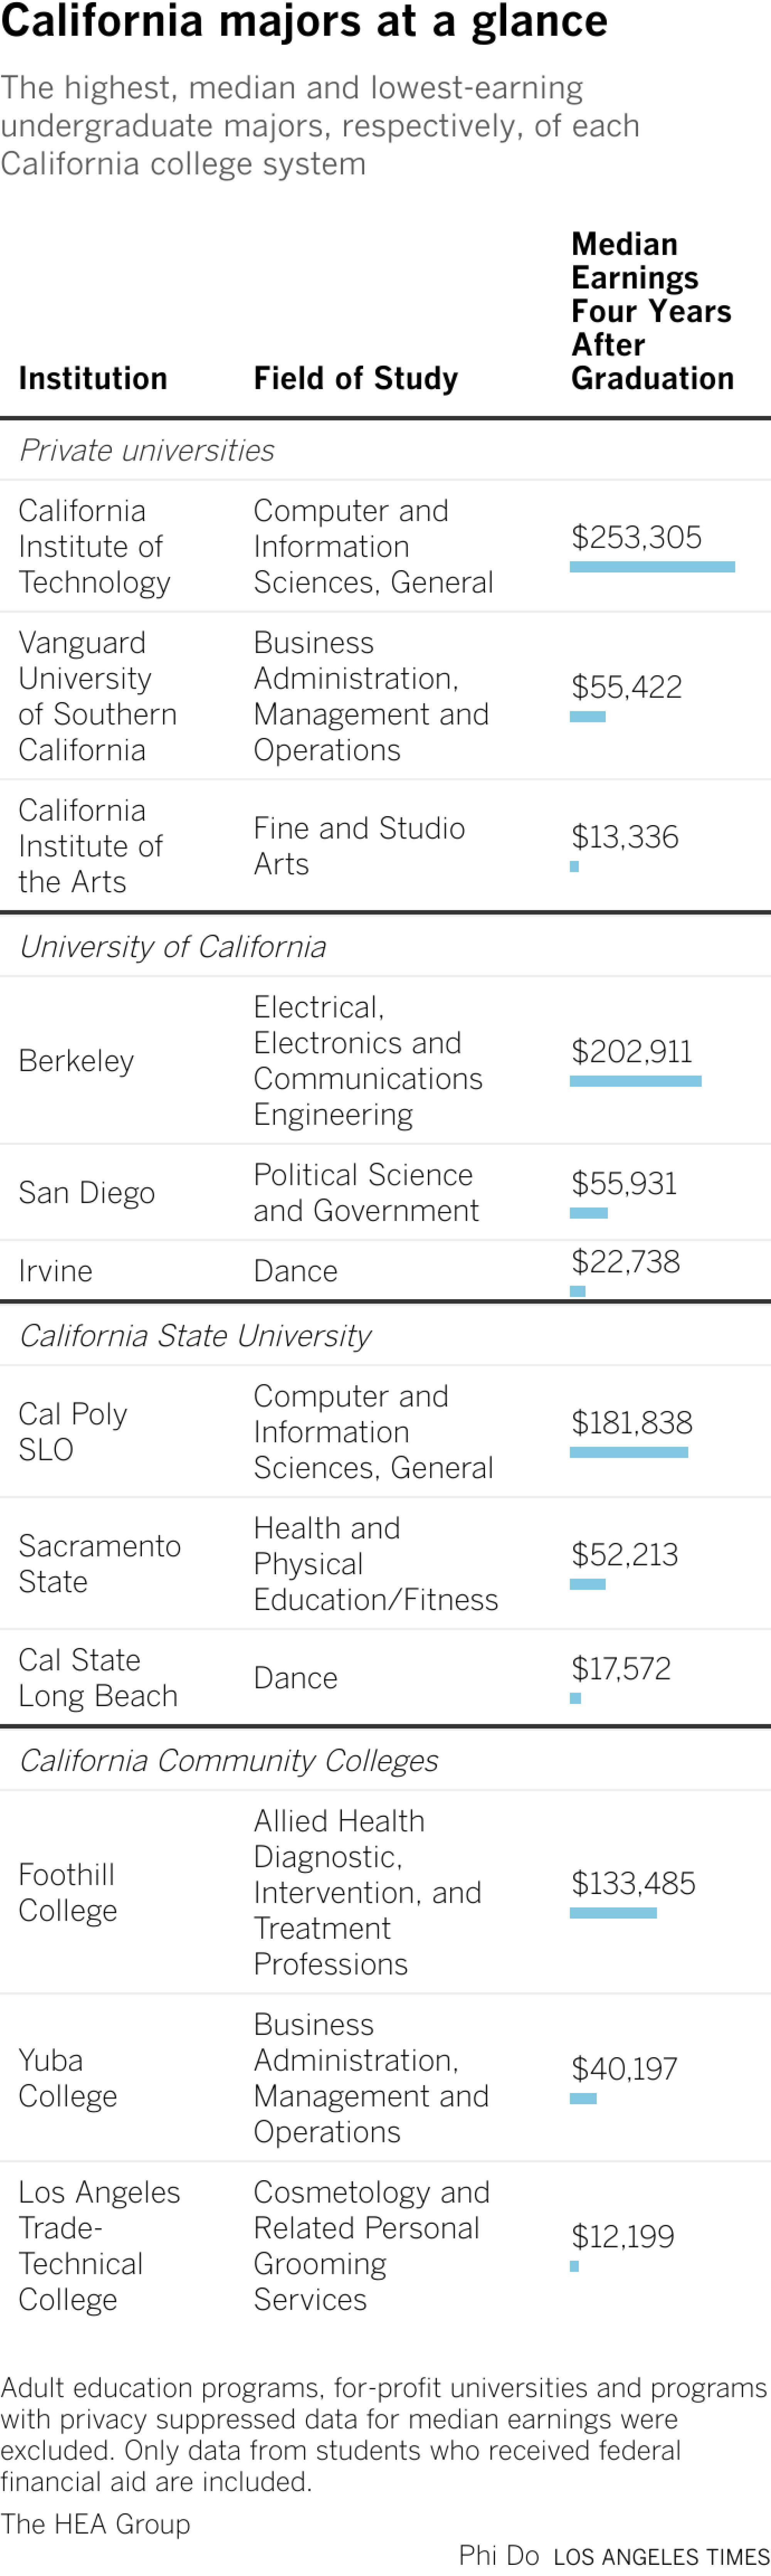 Table showing highest, median and lowest-earning undergraduate majors of each college system in California